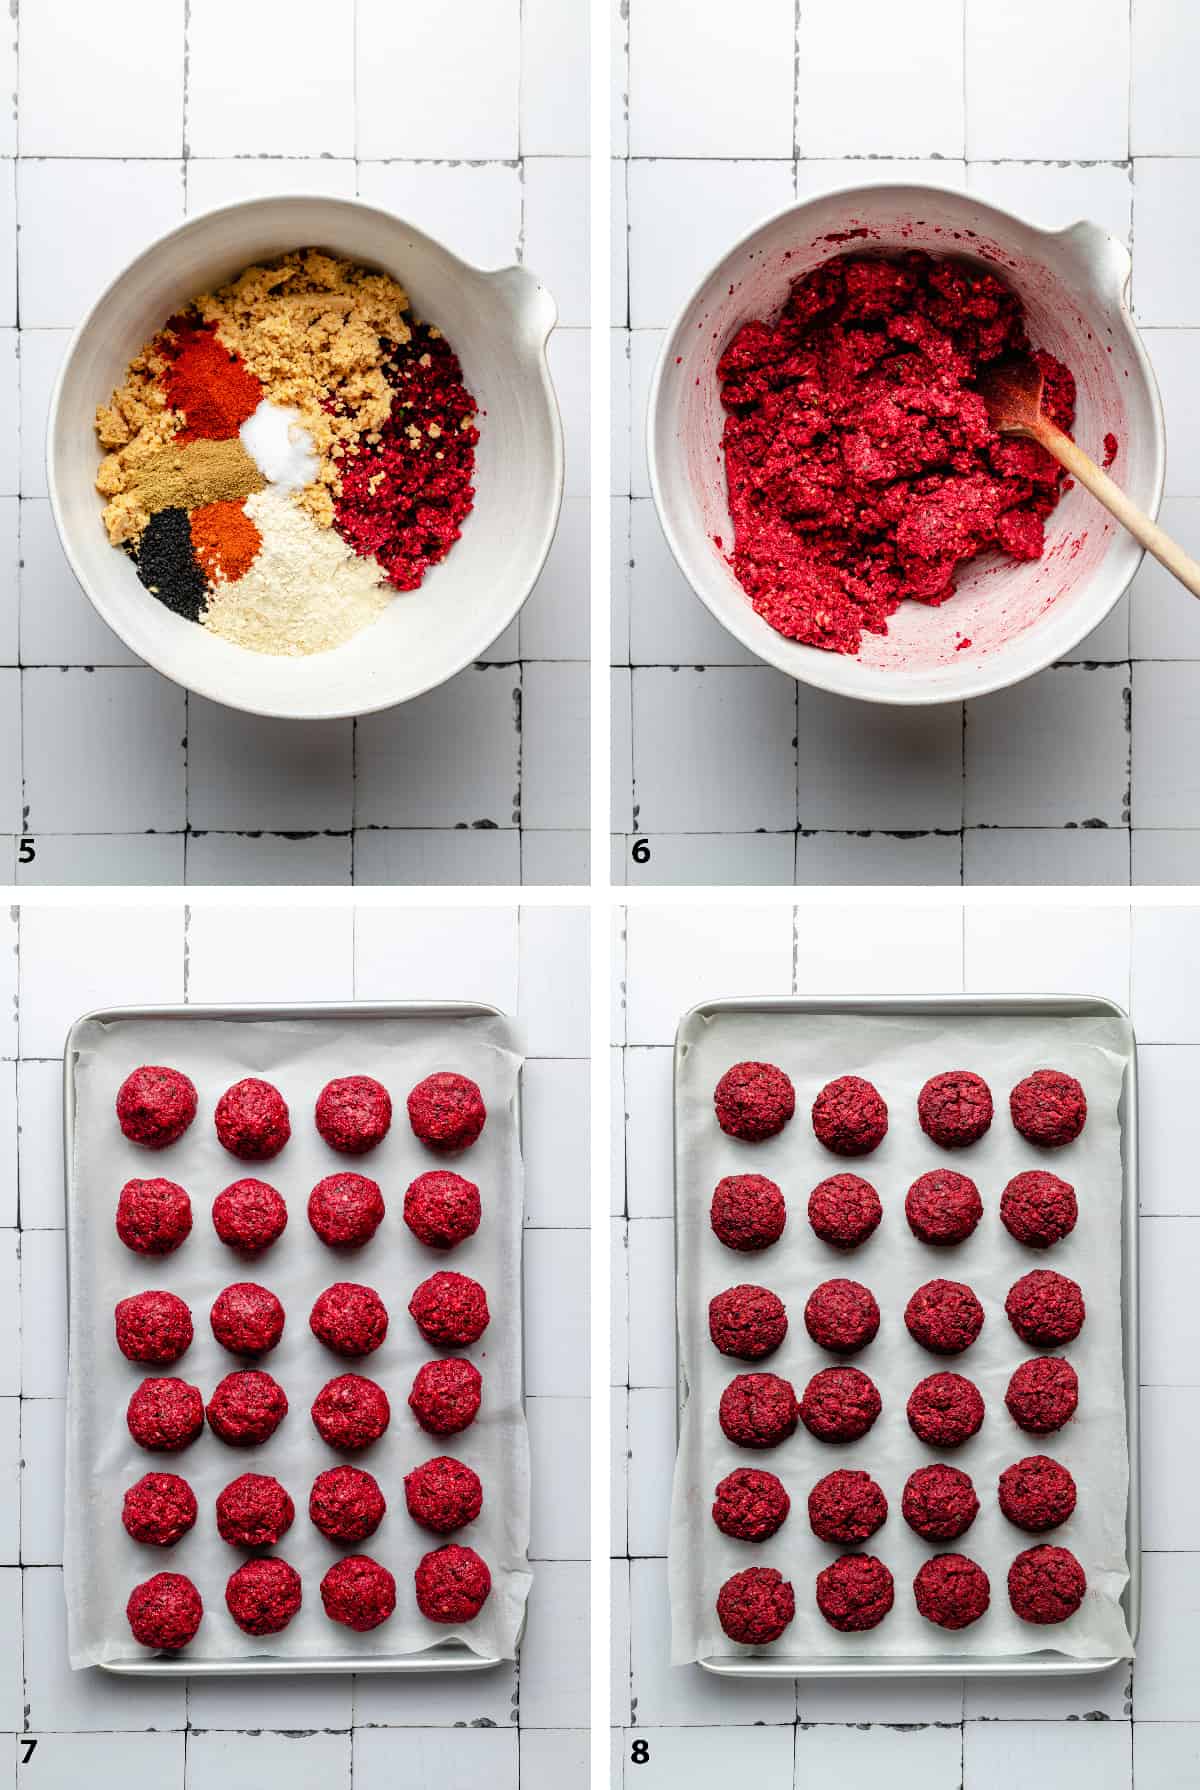 Process steps of all ingredients in a bowl, mixed together, scooped and rolled into balls then baked. 